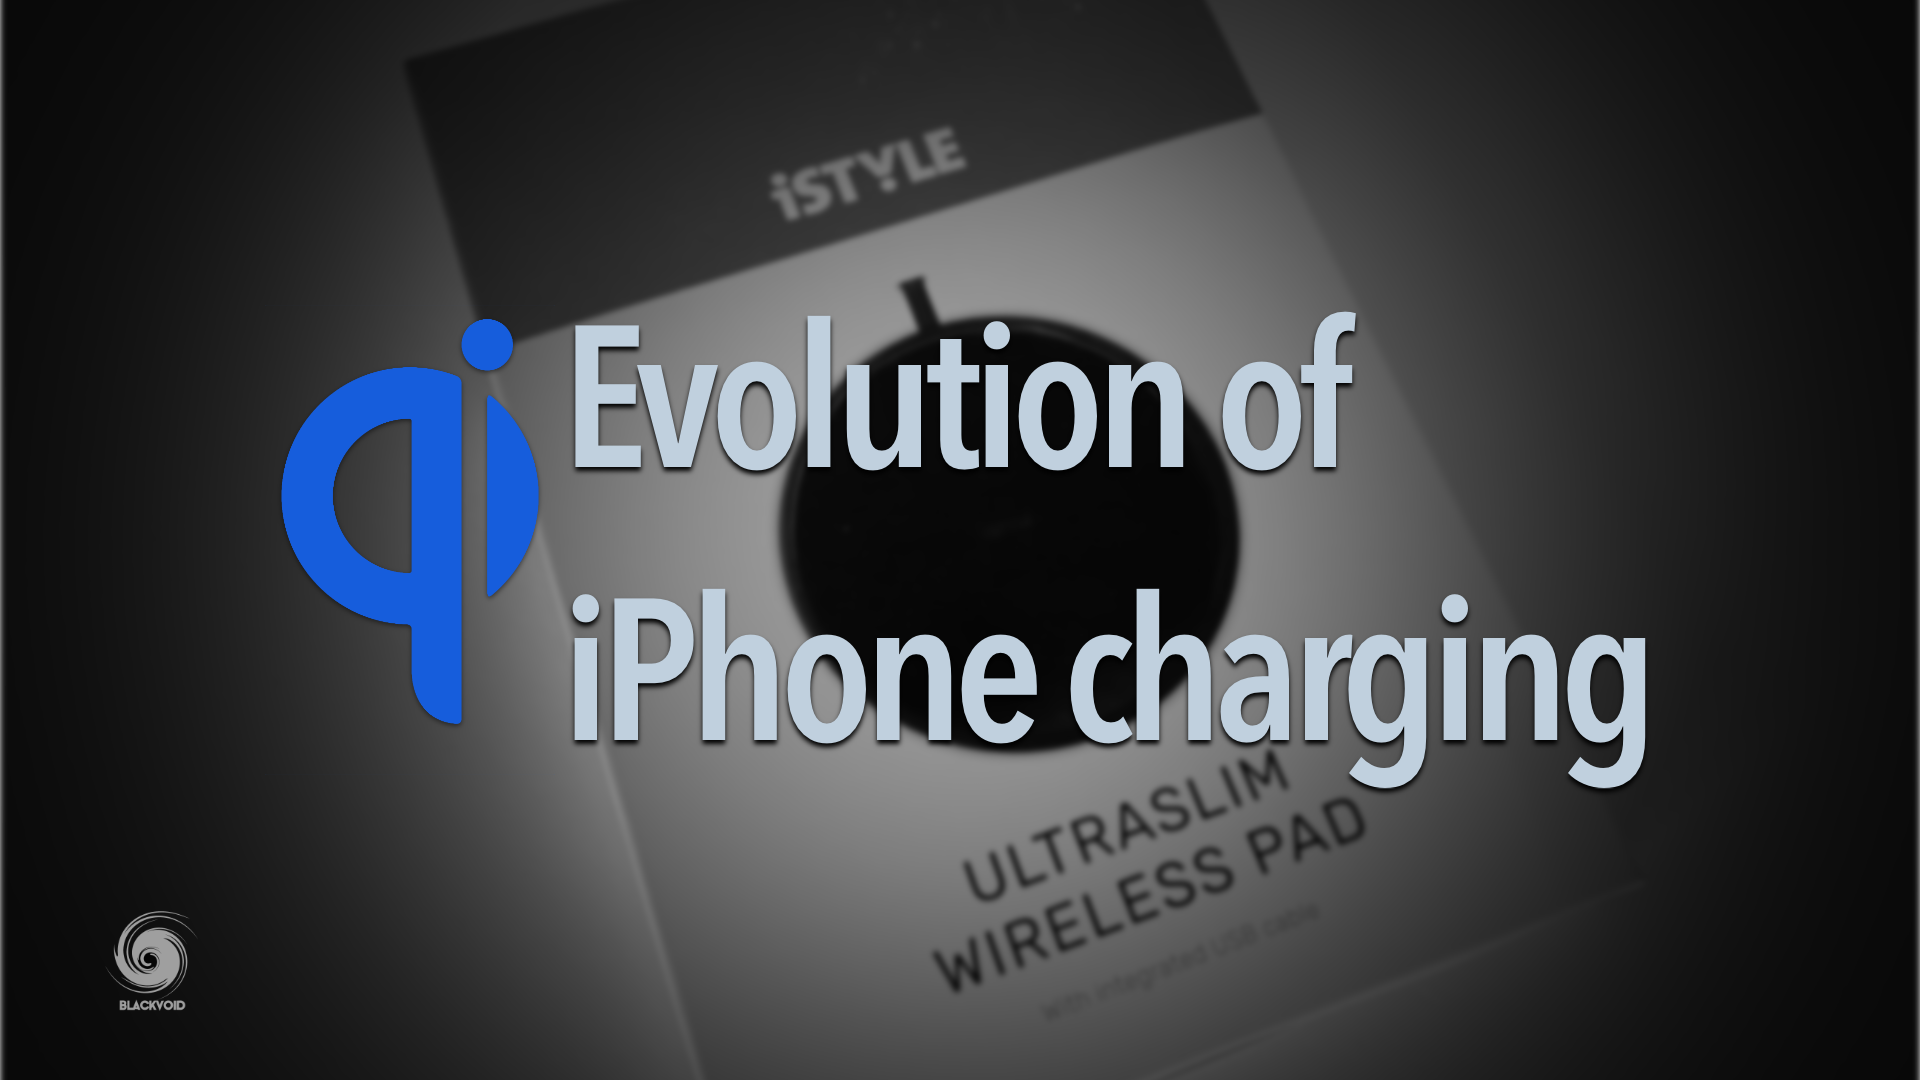 Evolution of iPhone charging